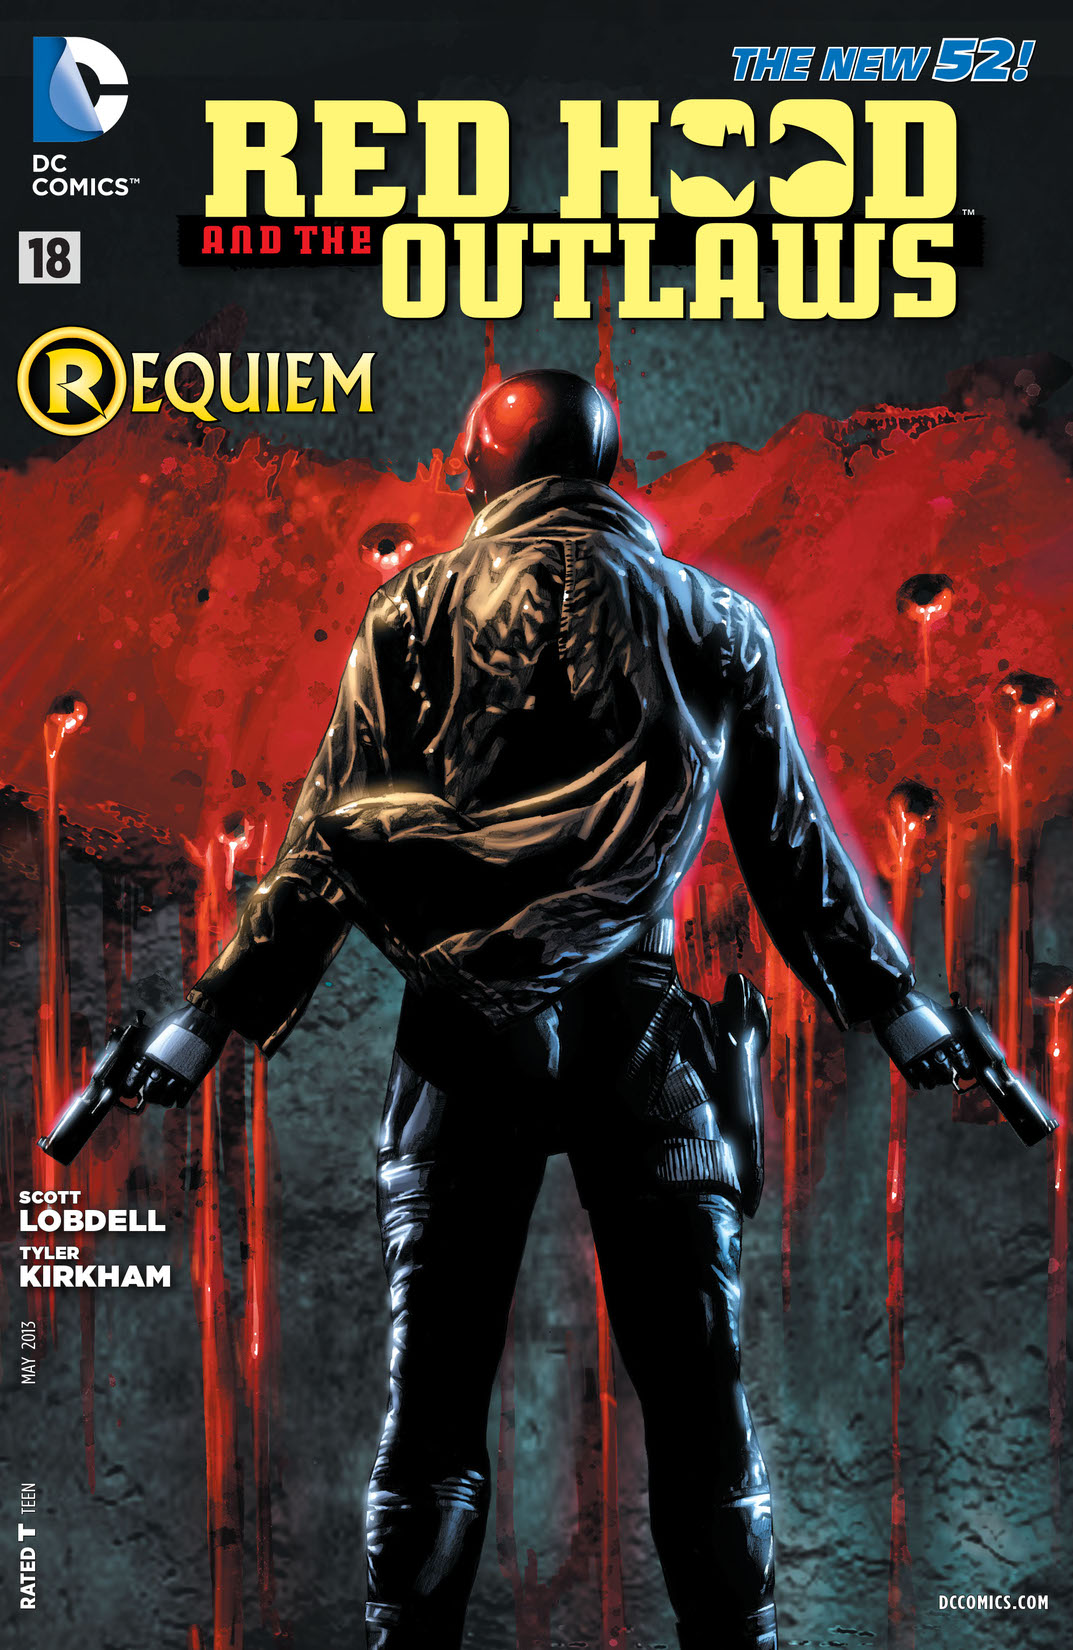 Red Hood and the Outlaws (2011-) #18 preview images